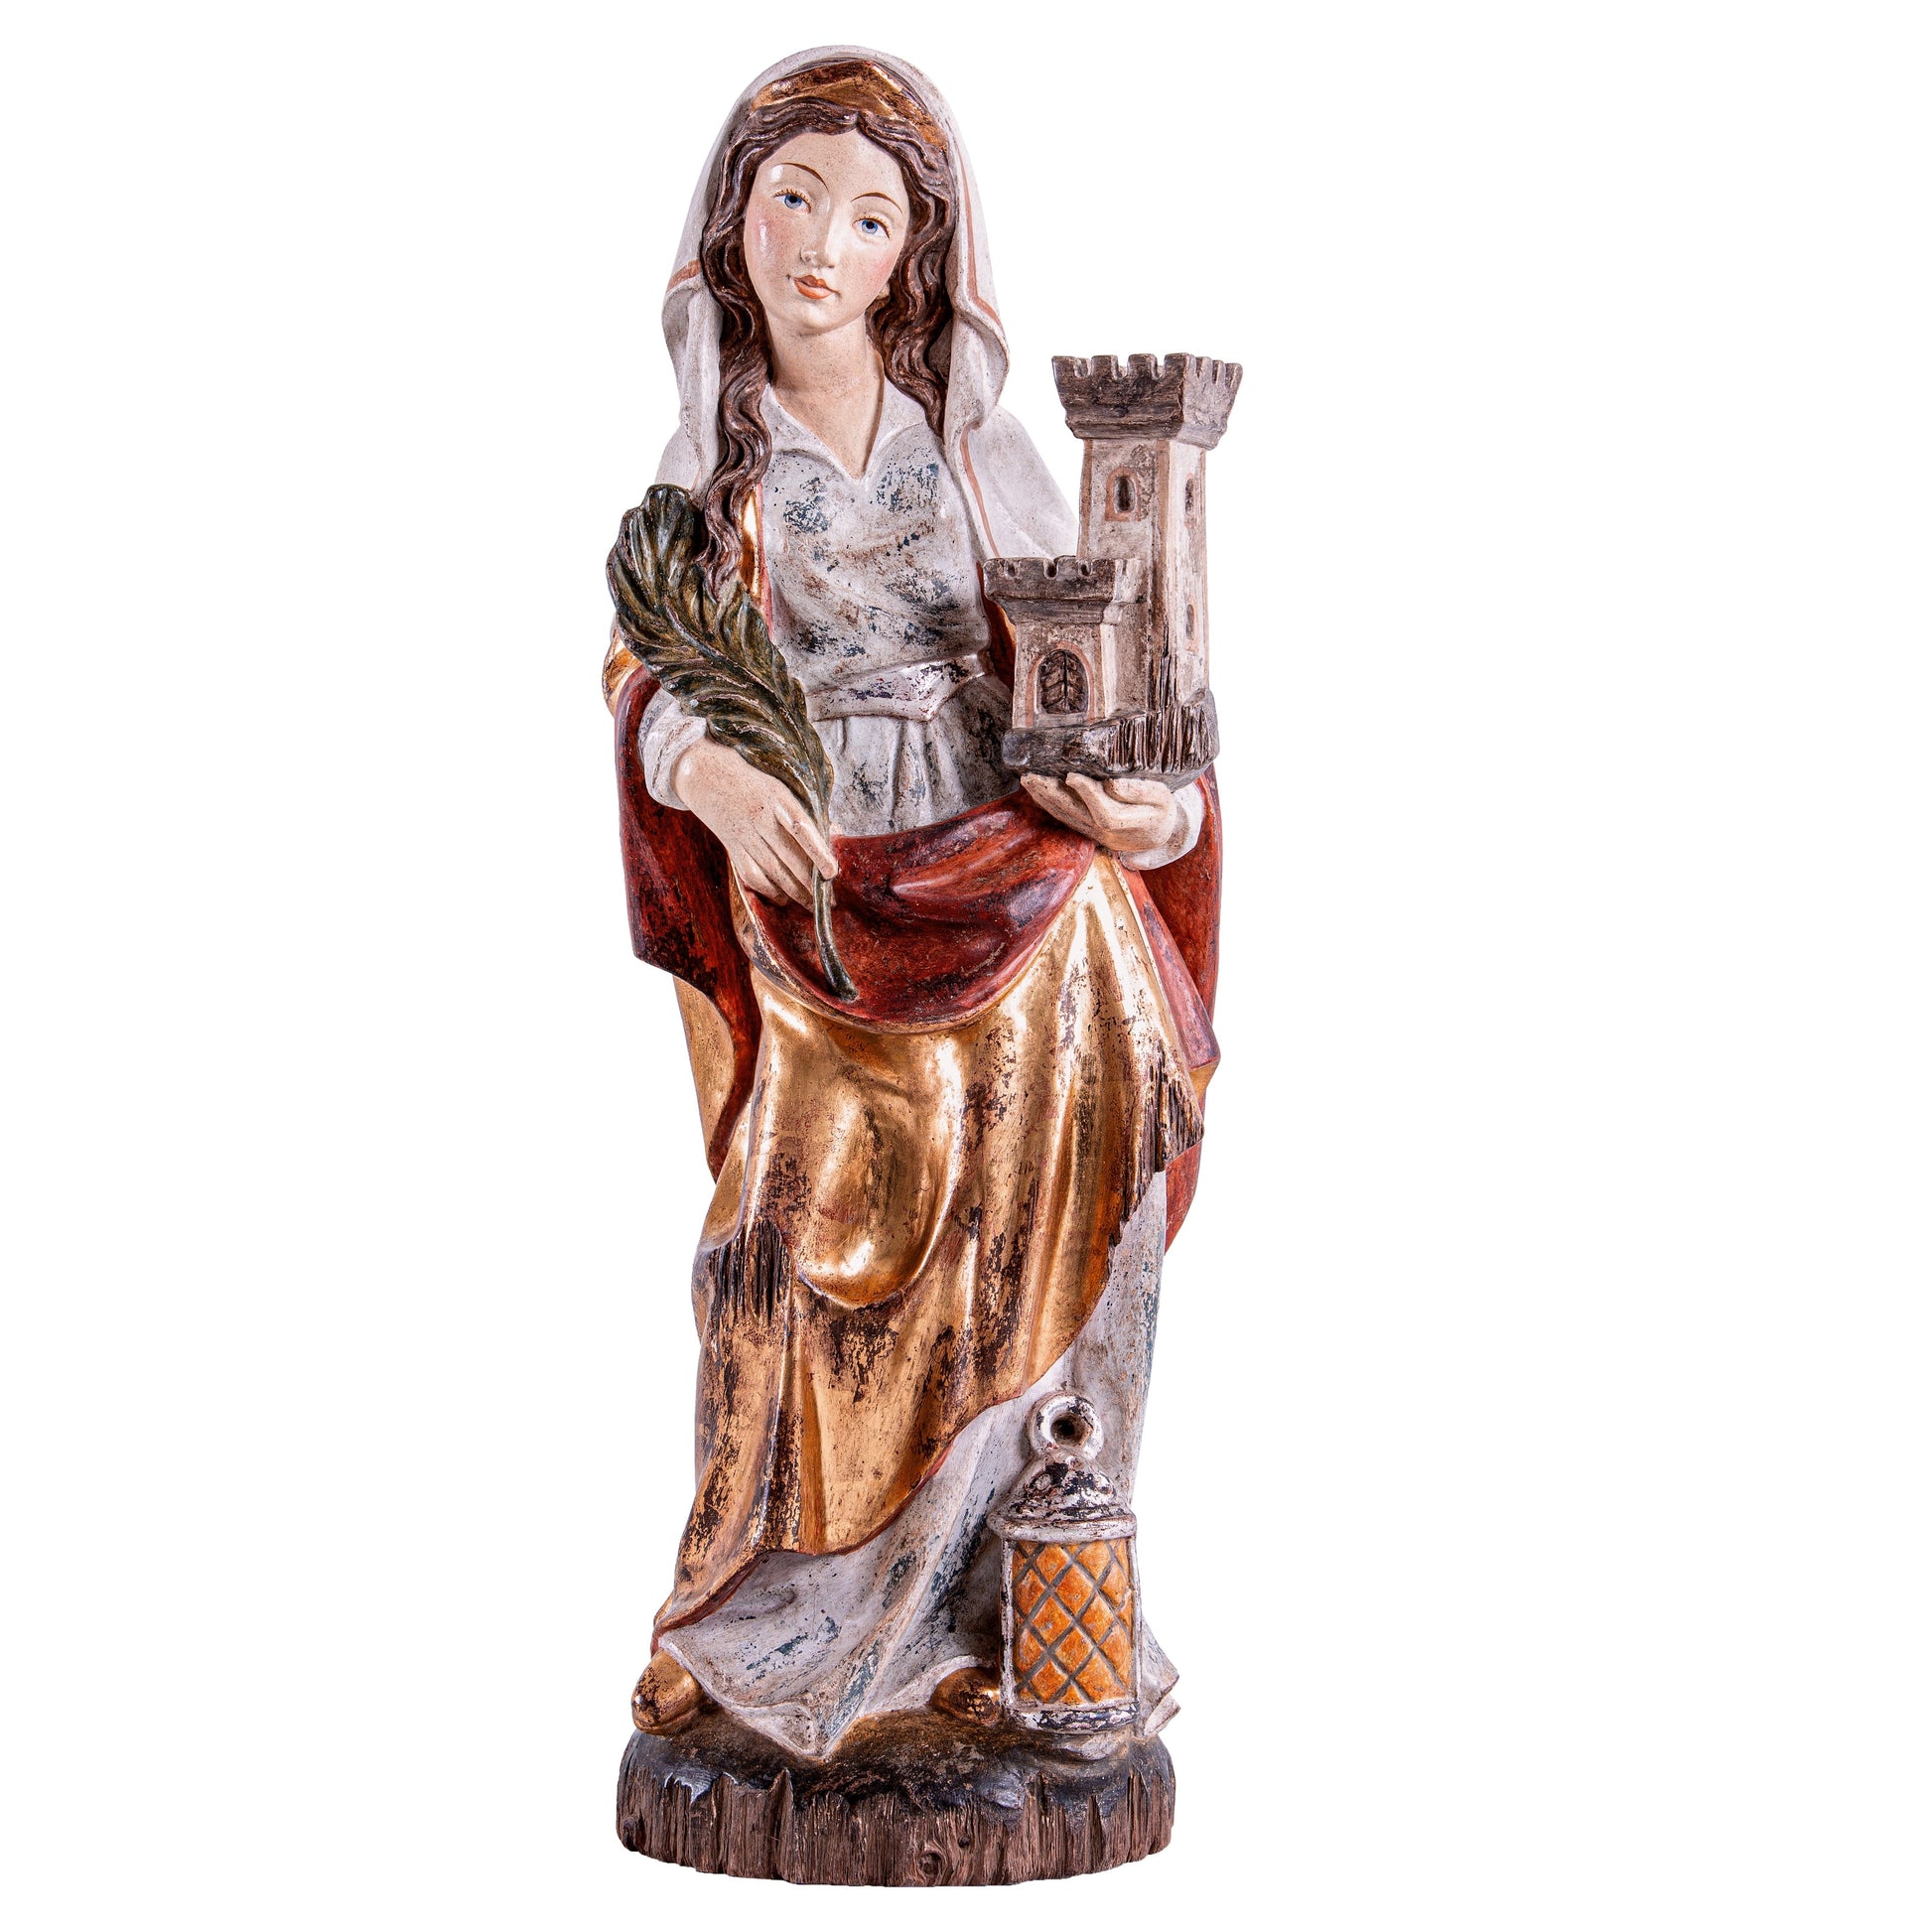 Mondo Cattolico Golden / 30 cm (11.8 in) Wooden statue of St. Barbara gothic style